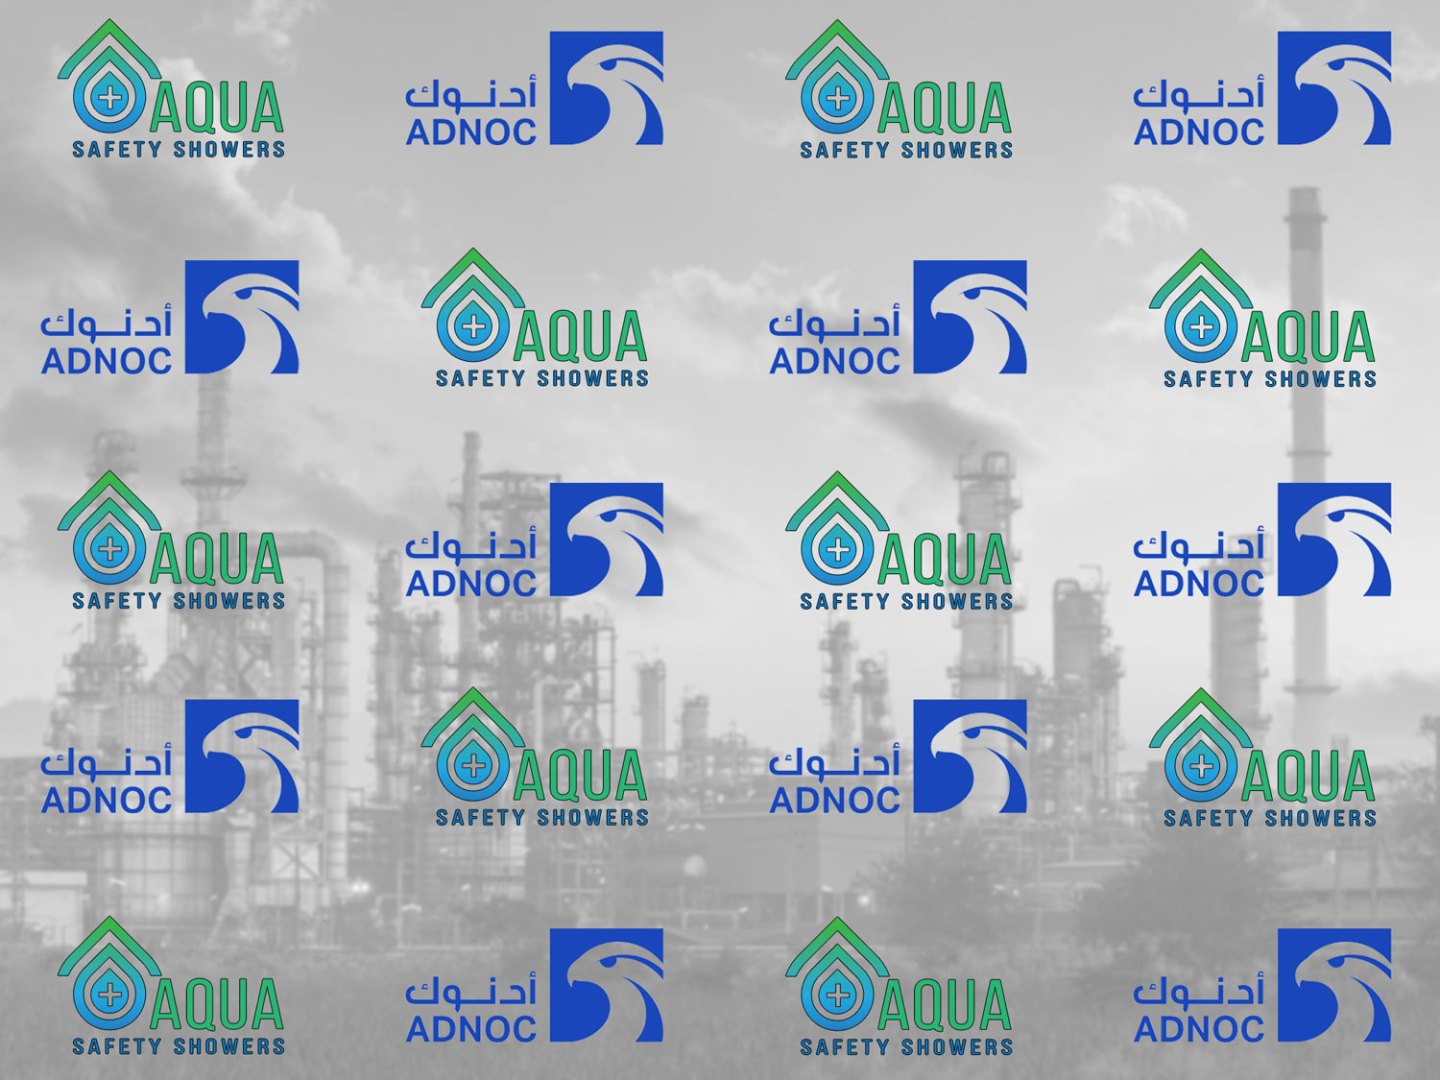 Aqua Safety Showers have been approved by ADNOC and SPC